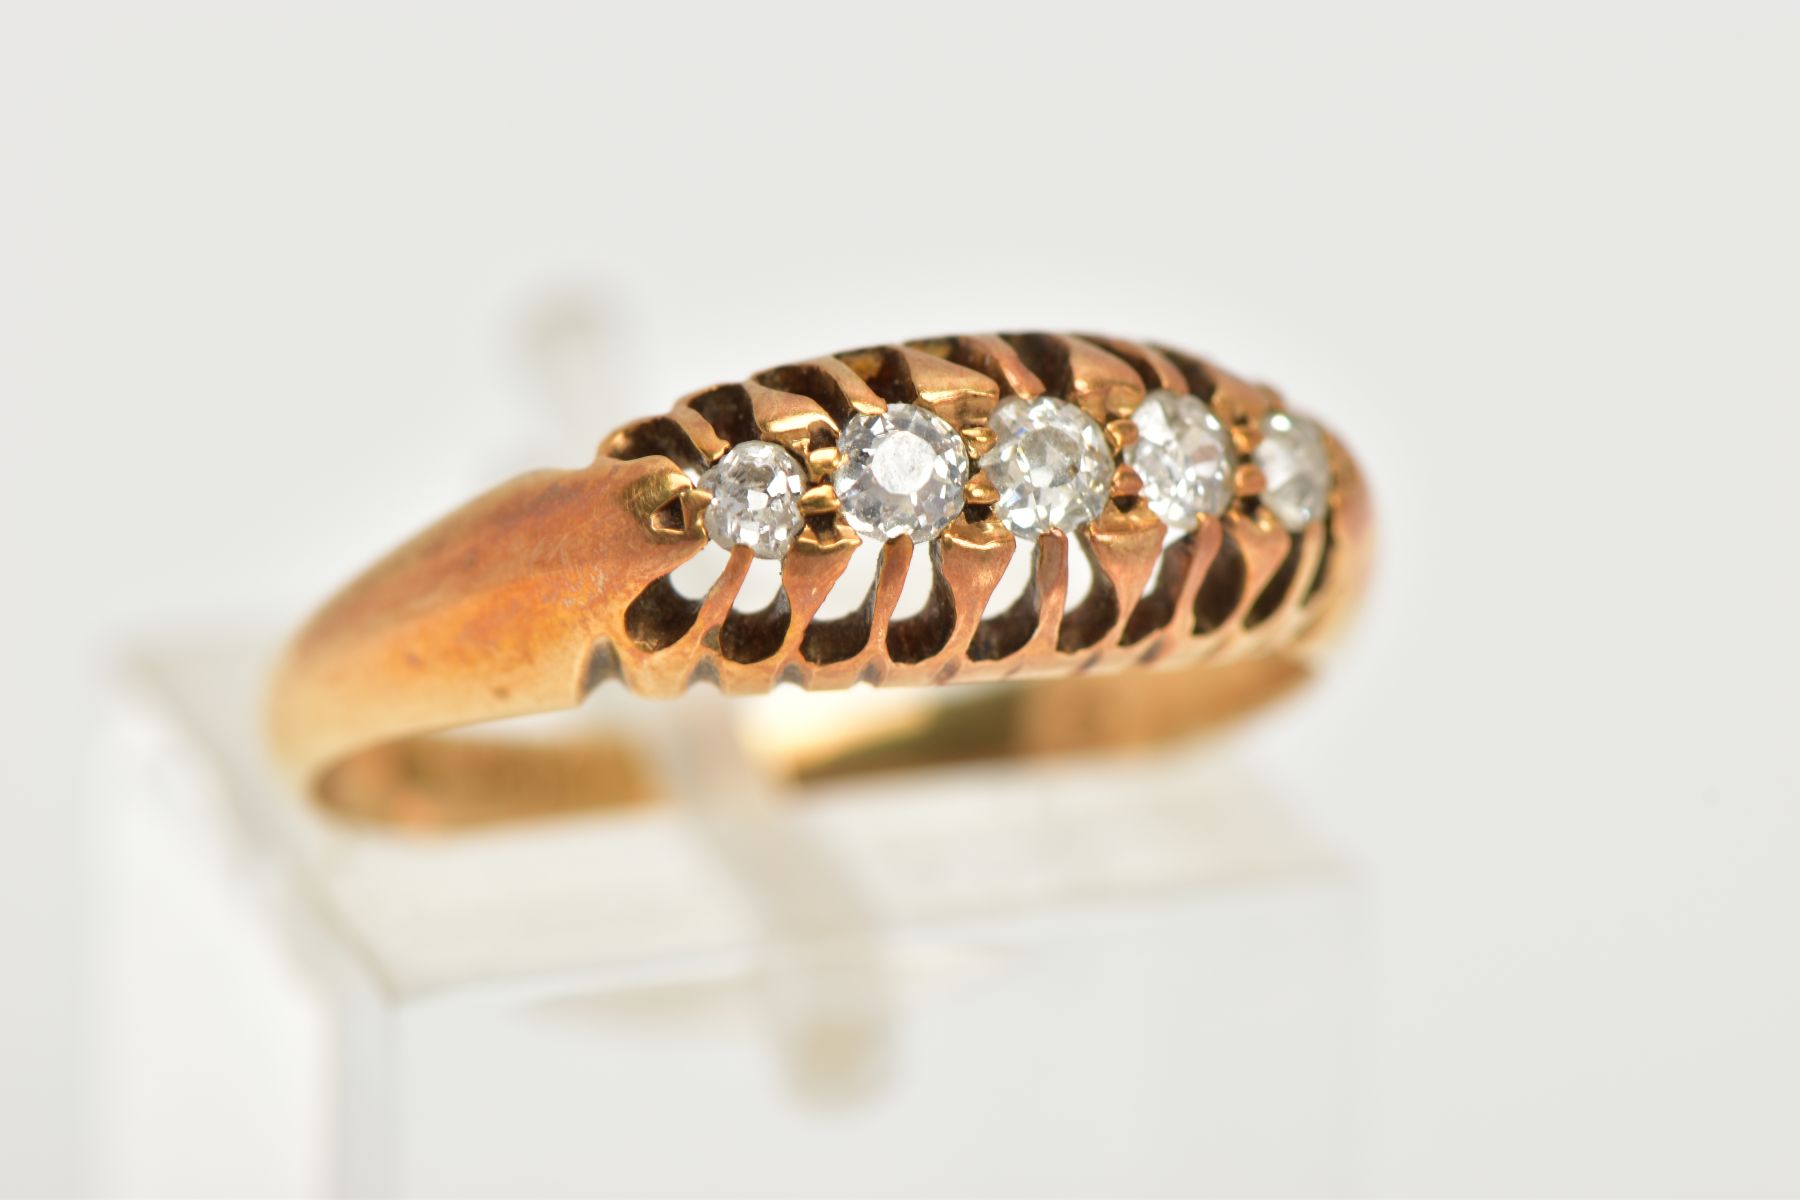 AN 18CT GOLD DIAMOND BOAT RING, five old cut diamonds, prong set in a yellow gold mount, leading - Image 4 of 4